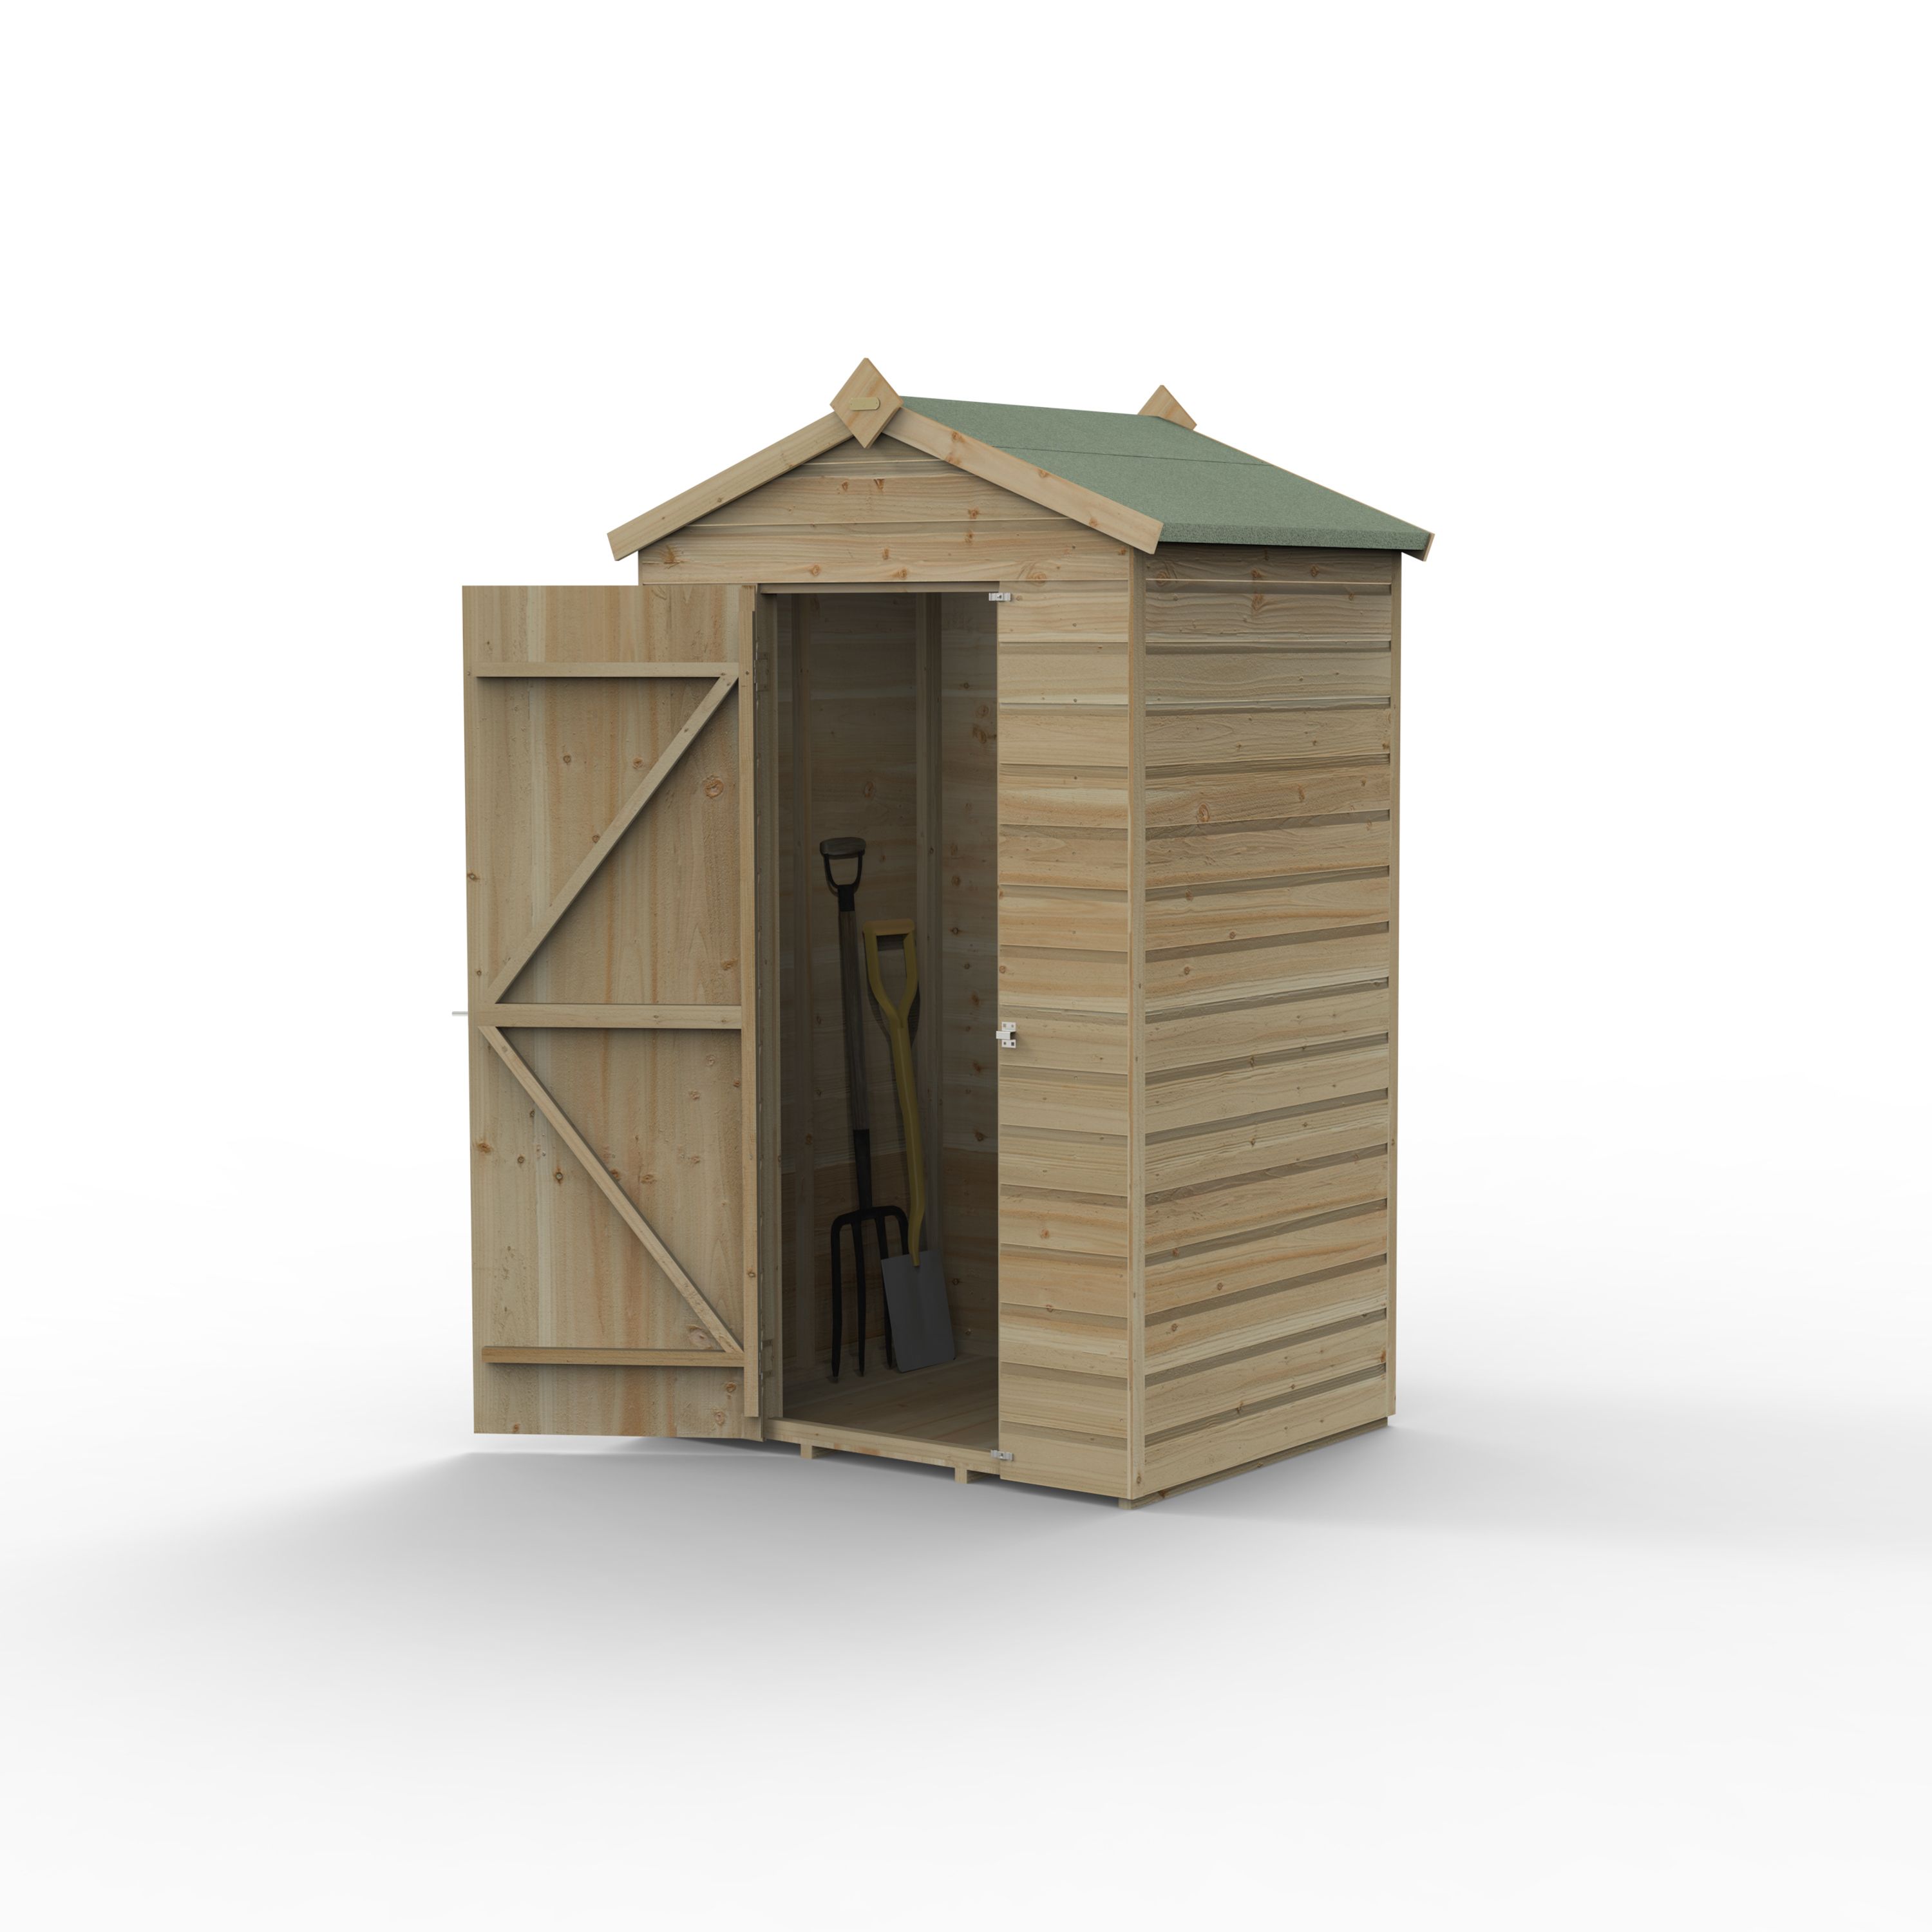 Forest Garden Beckwood 4x3 ft Apex Natural timber Wooden Shed with floor (Base included)